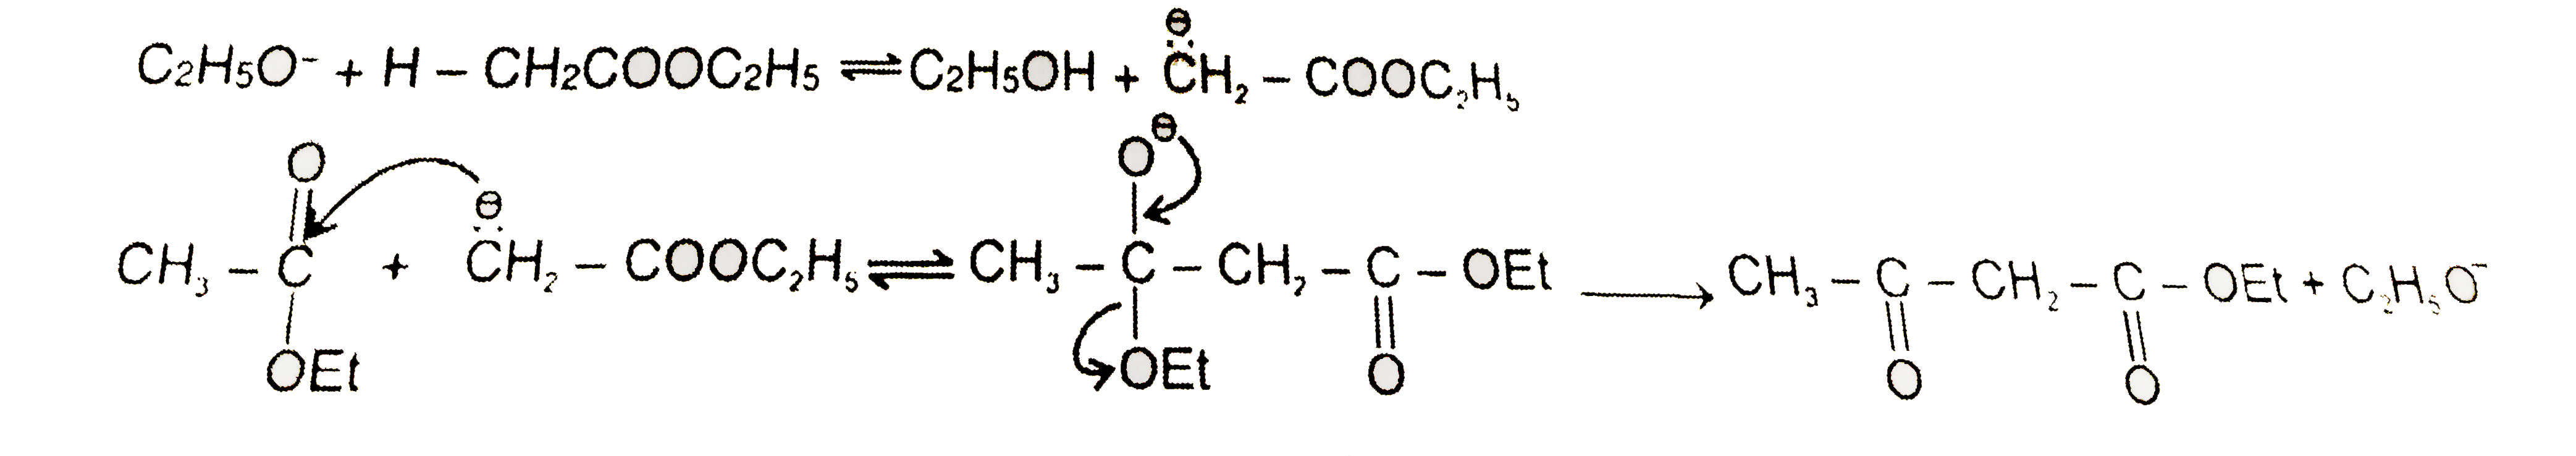 Ester having alpha-hydrogen on treatement with a strong base eg. C(2)H(5)Ona undergoes self condensation to produce beta-keto esters. This is called claisen condensation        C(6)H(5)-underset(O)underset(||)(C)-OC(2)H(5)+CH(3)-underset(O)underset(||)(C)-OC(2)H(5) overset((1) C(2)H(5)overset(Theta)(O)Na^(o+))underset((2) H^(o+))to